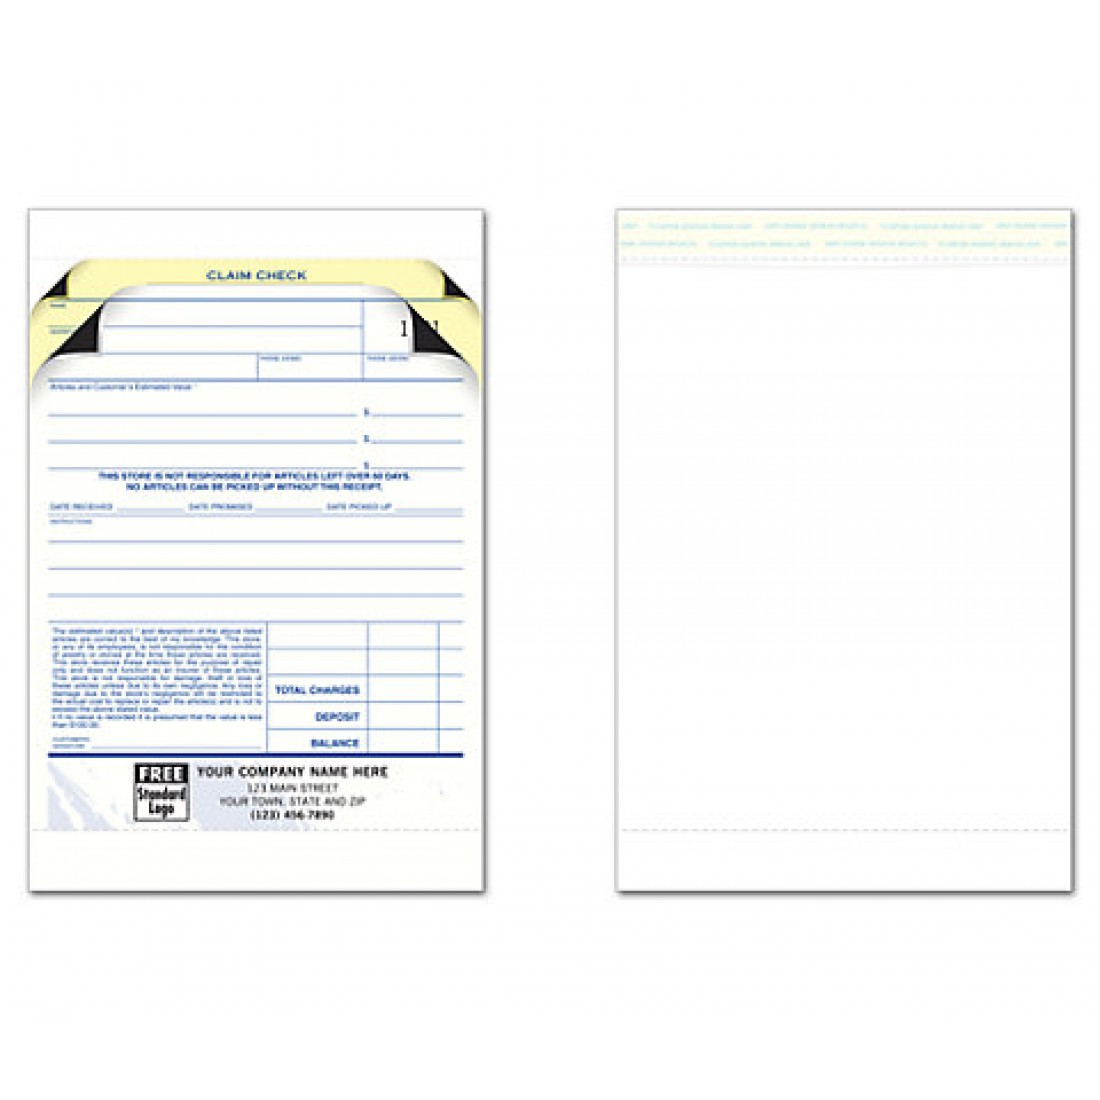 Jewelry Repair Order Forms With Envelope Free Shipping